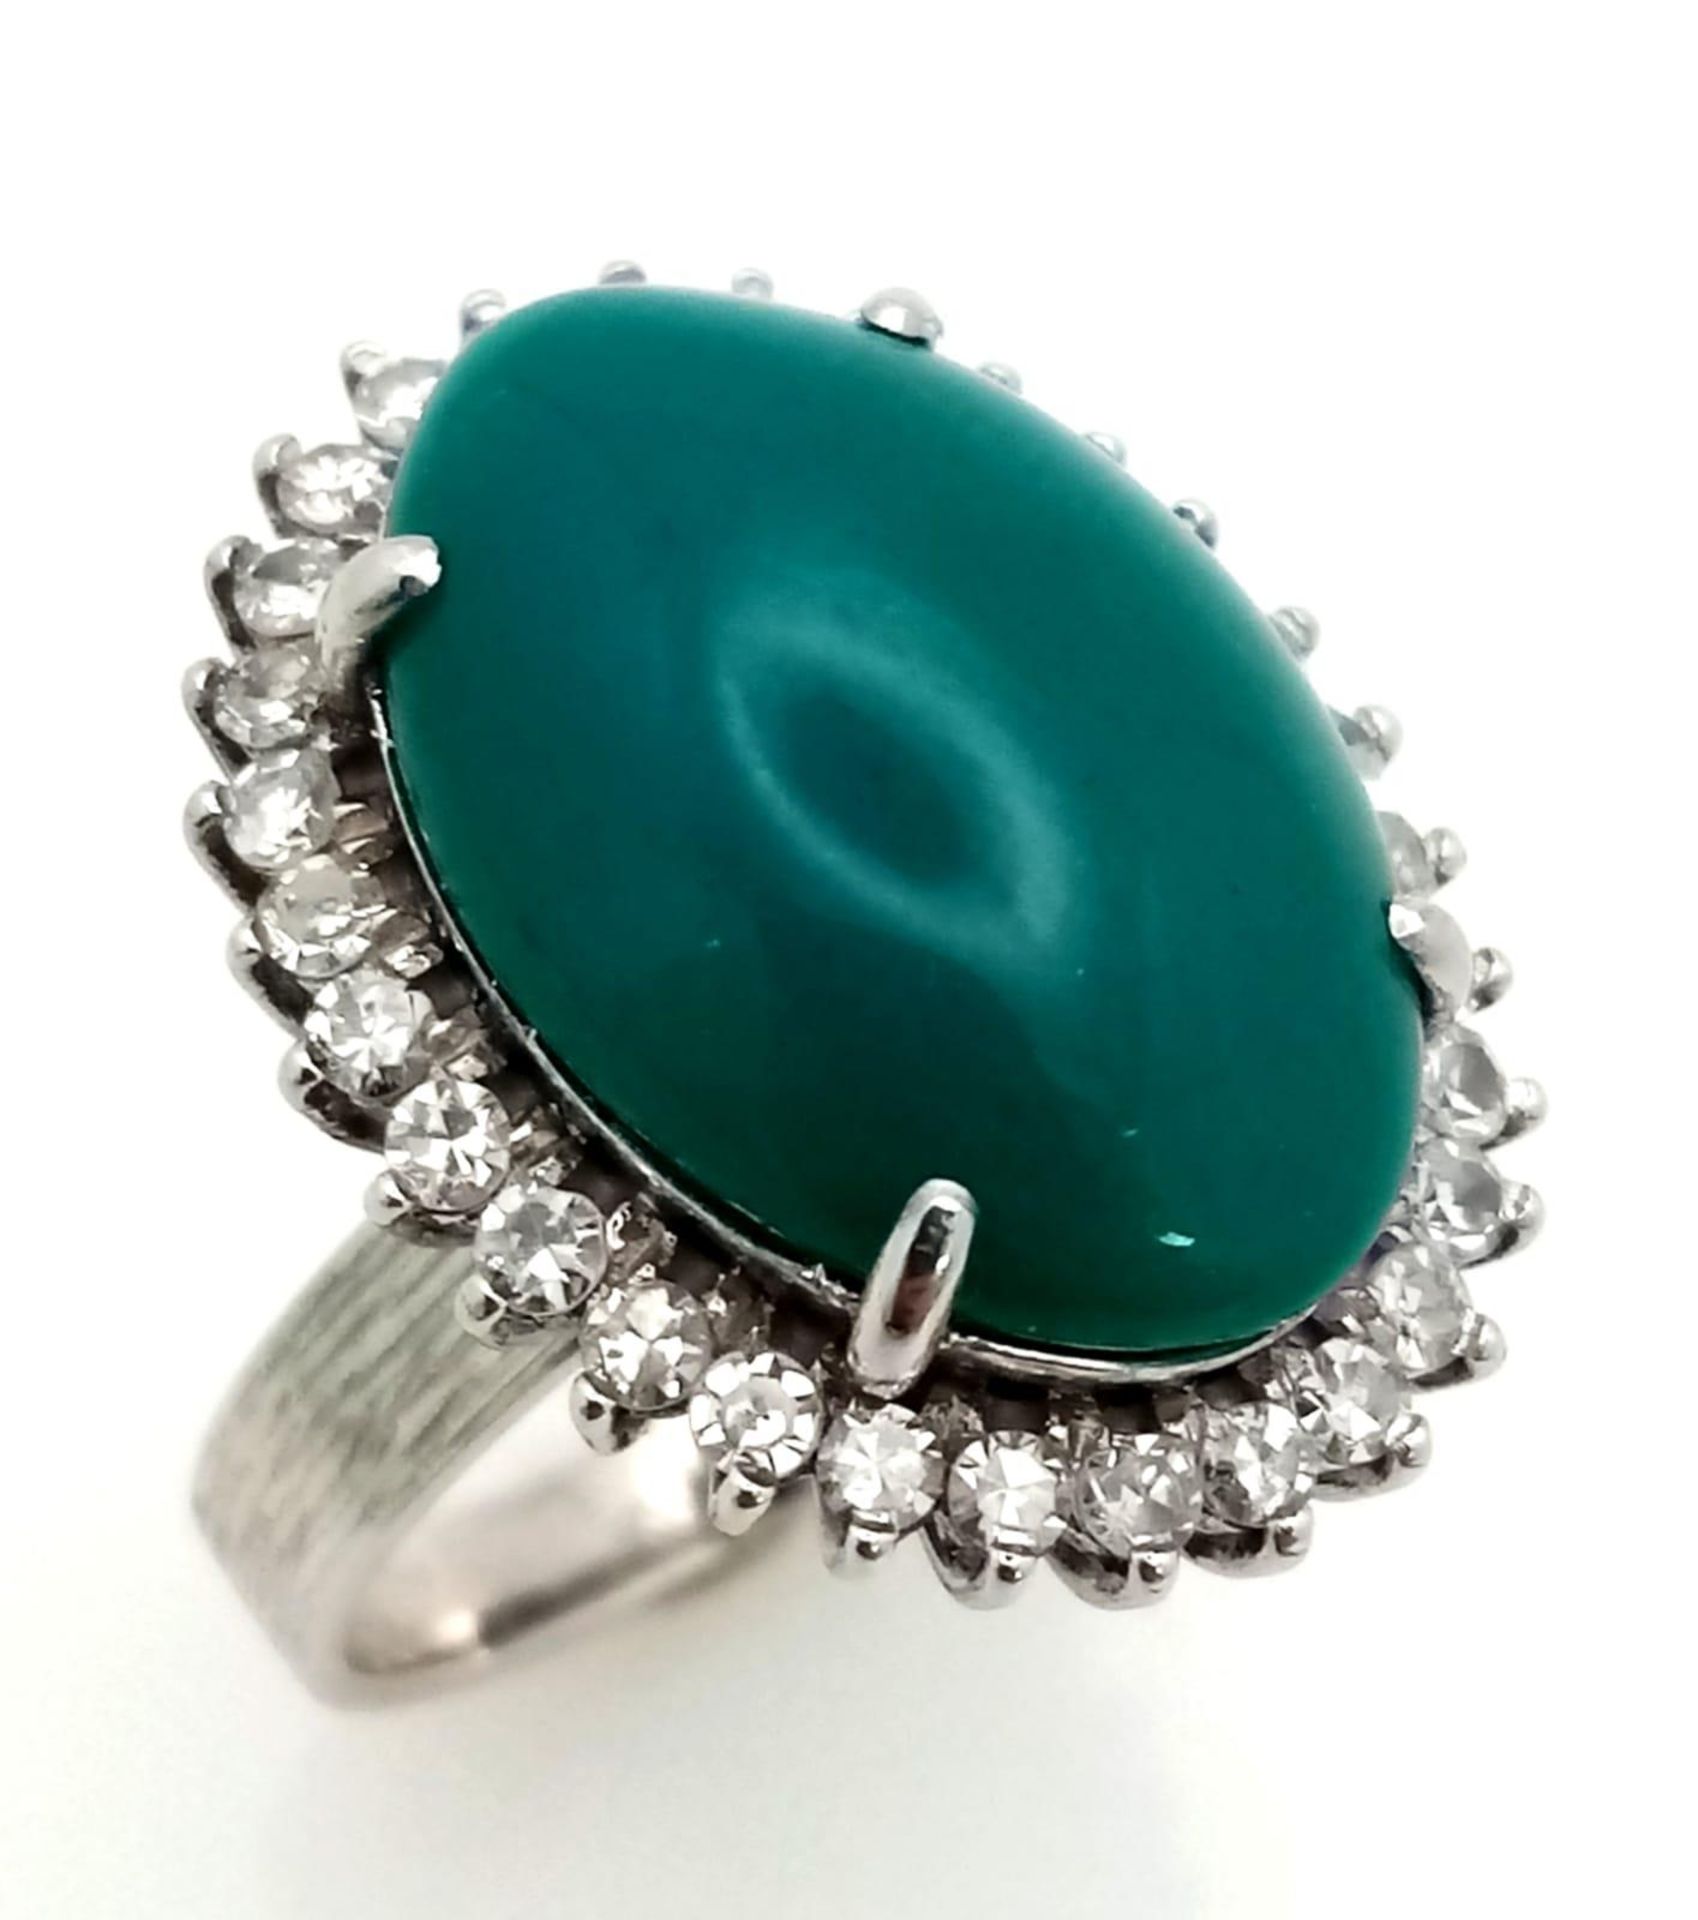 A 18K WHITE GOLD GREEN JADE CENTRE STONE SURROUNDED BY DIAMONDS RING . 0.66CT CABOCHON DIAMOND TOTAL